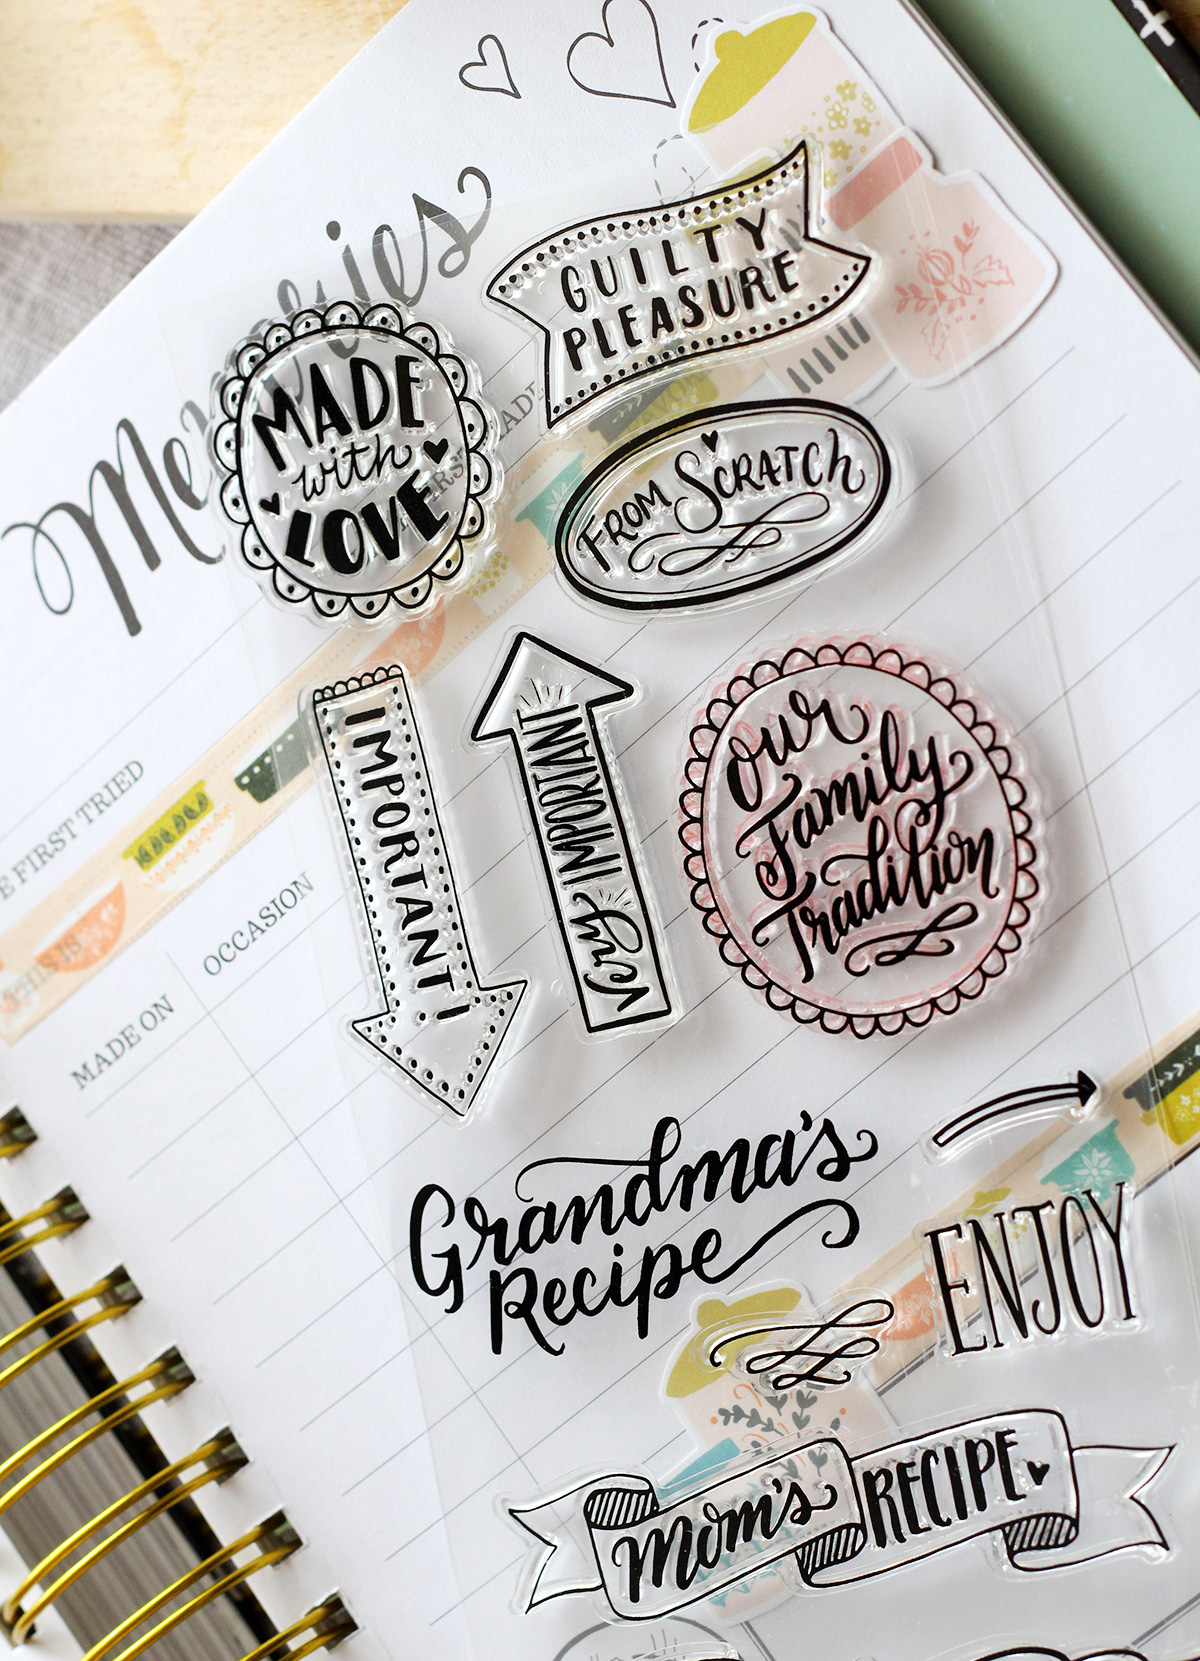 New Keepsake Kitchen Diary Stamps and Crafting Supplies